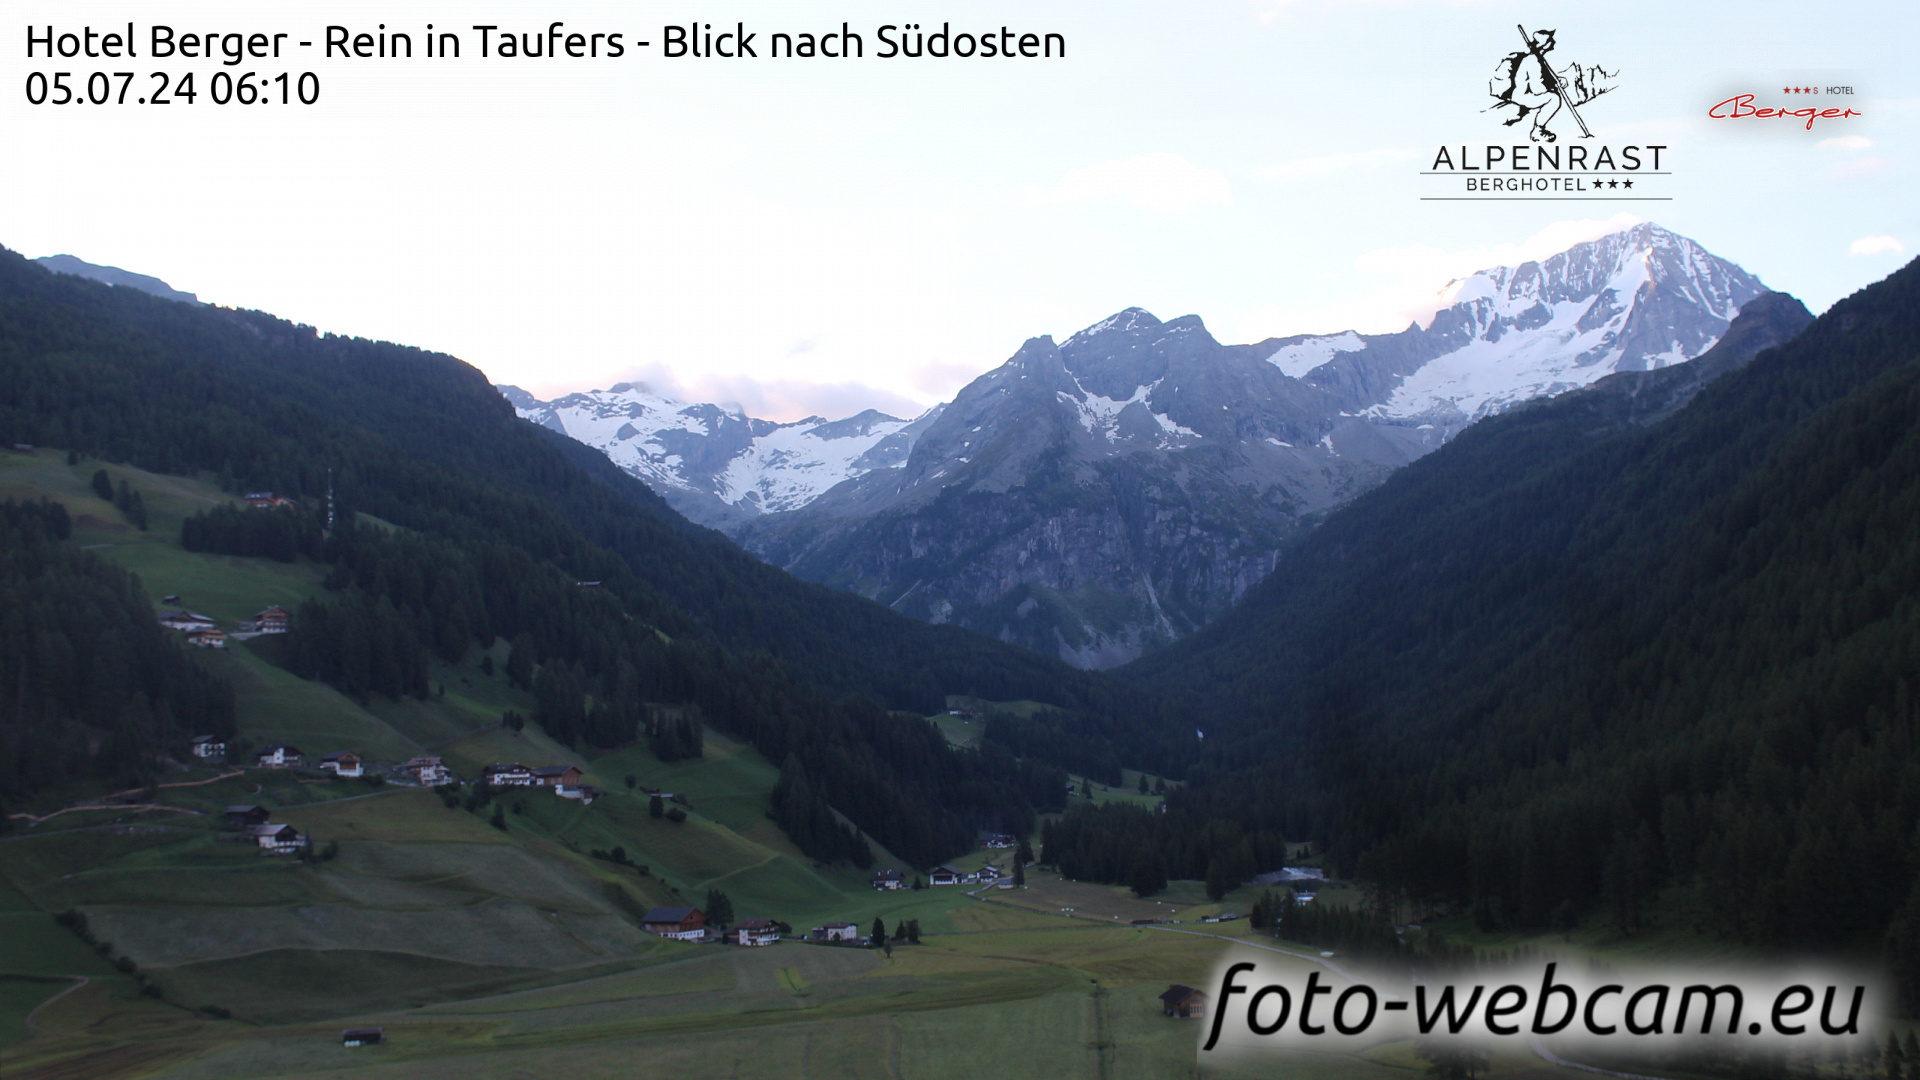 Rein in Taufers Do. 06:11